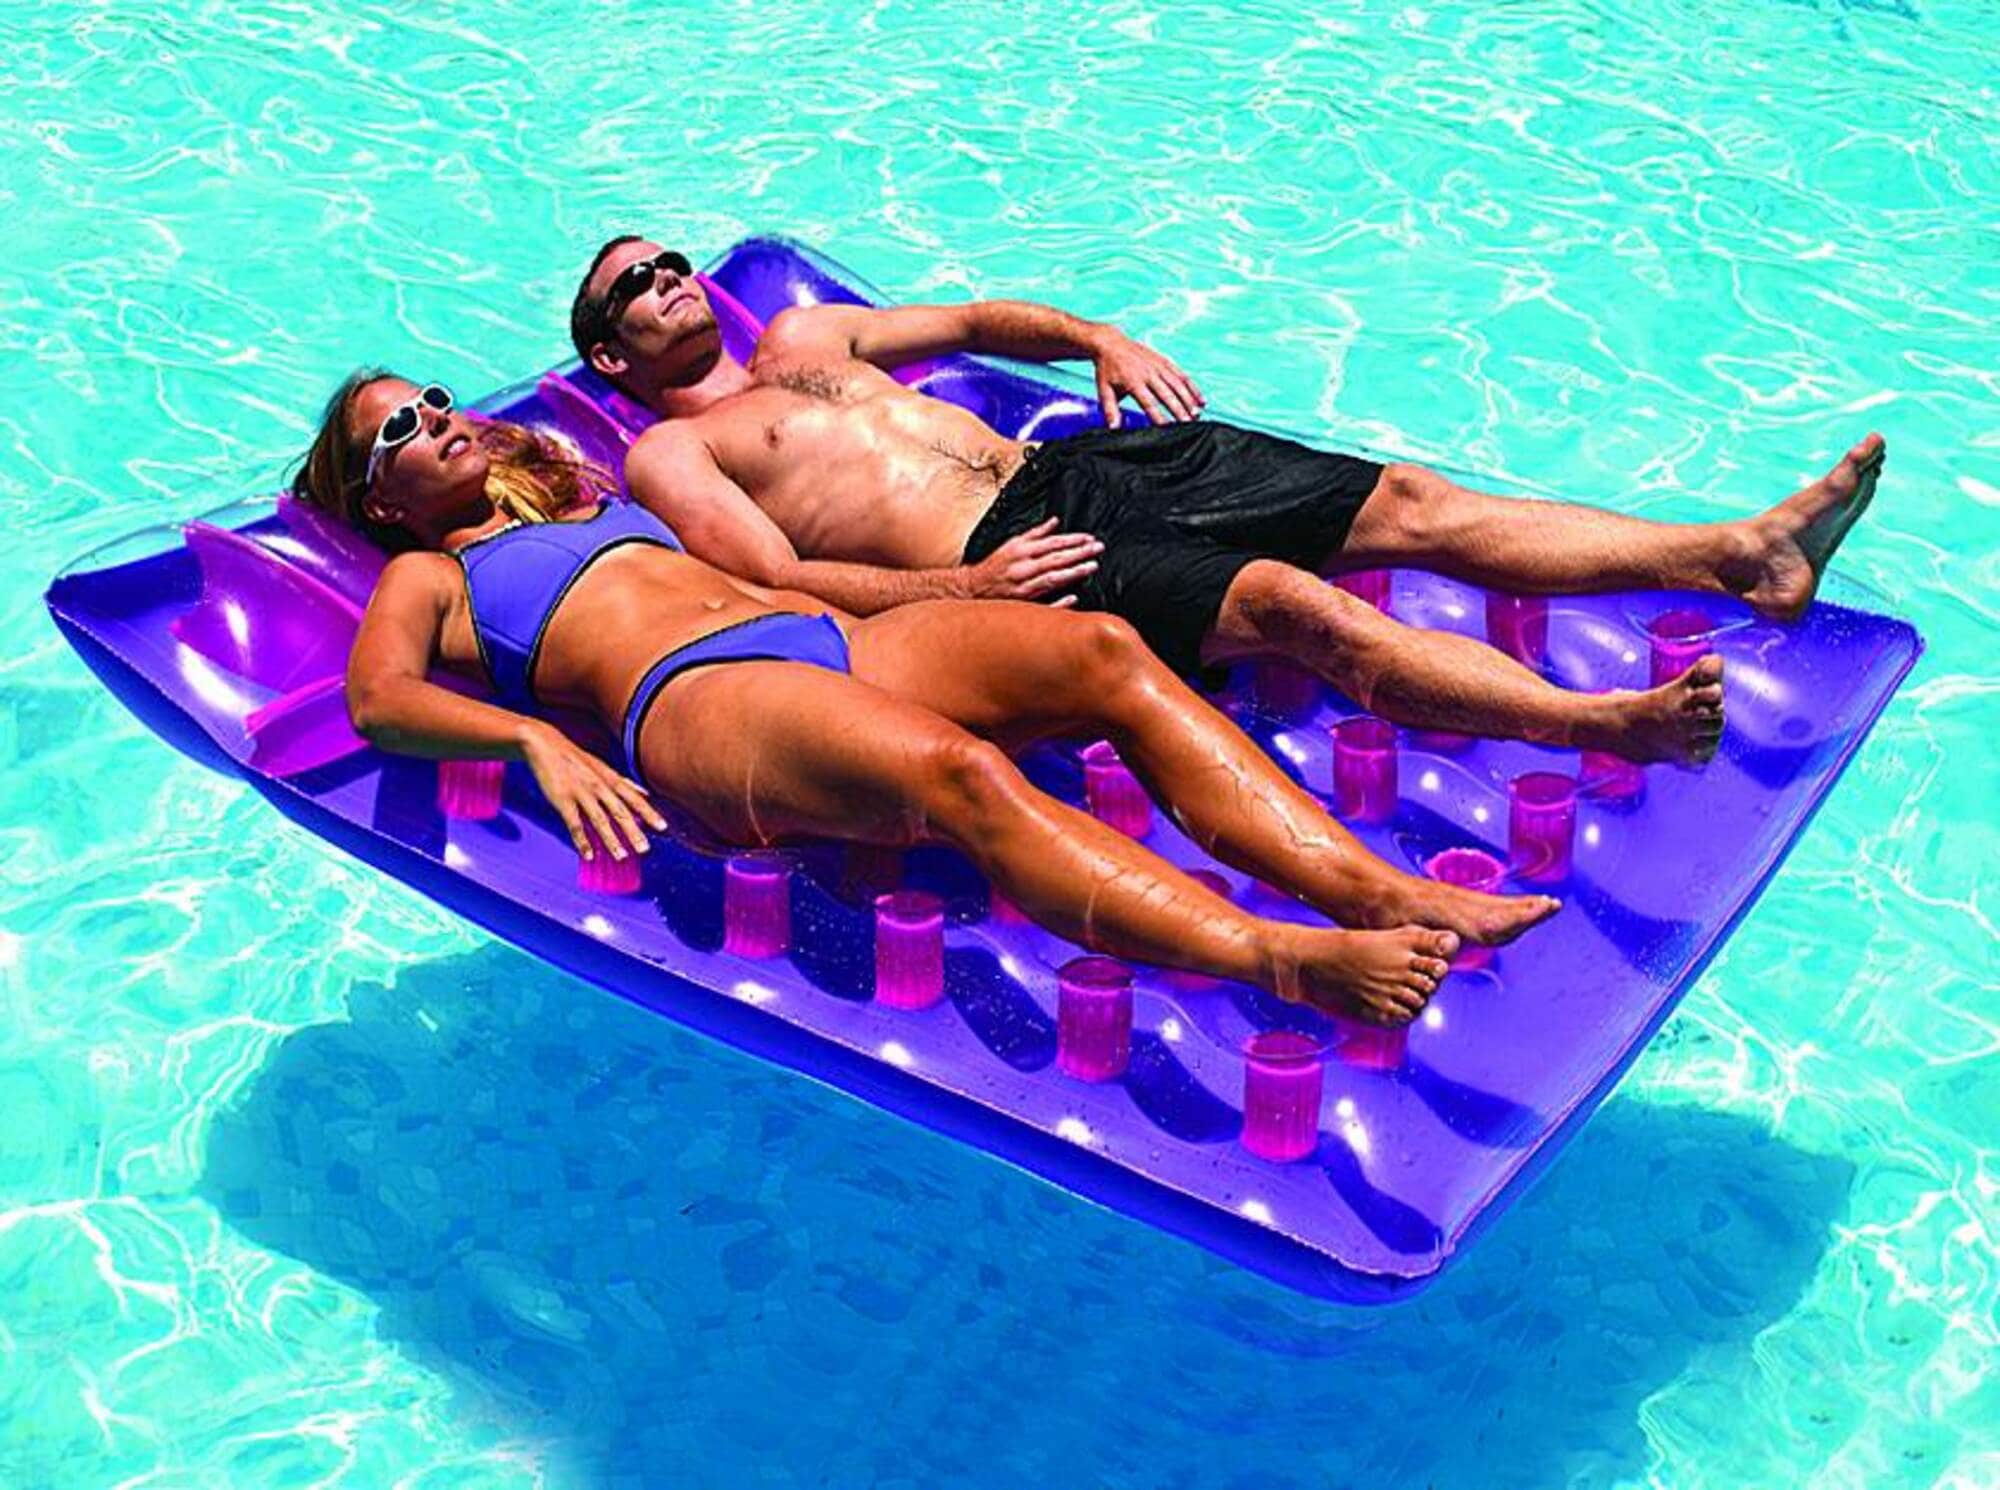 Swimline 78-in x 56-in 2-Seat Purple Inflatable Raft in the Pool